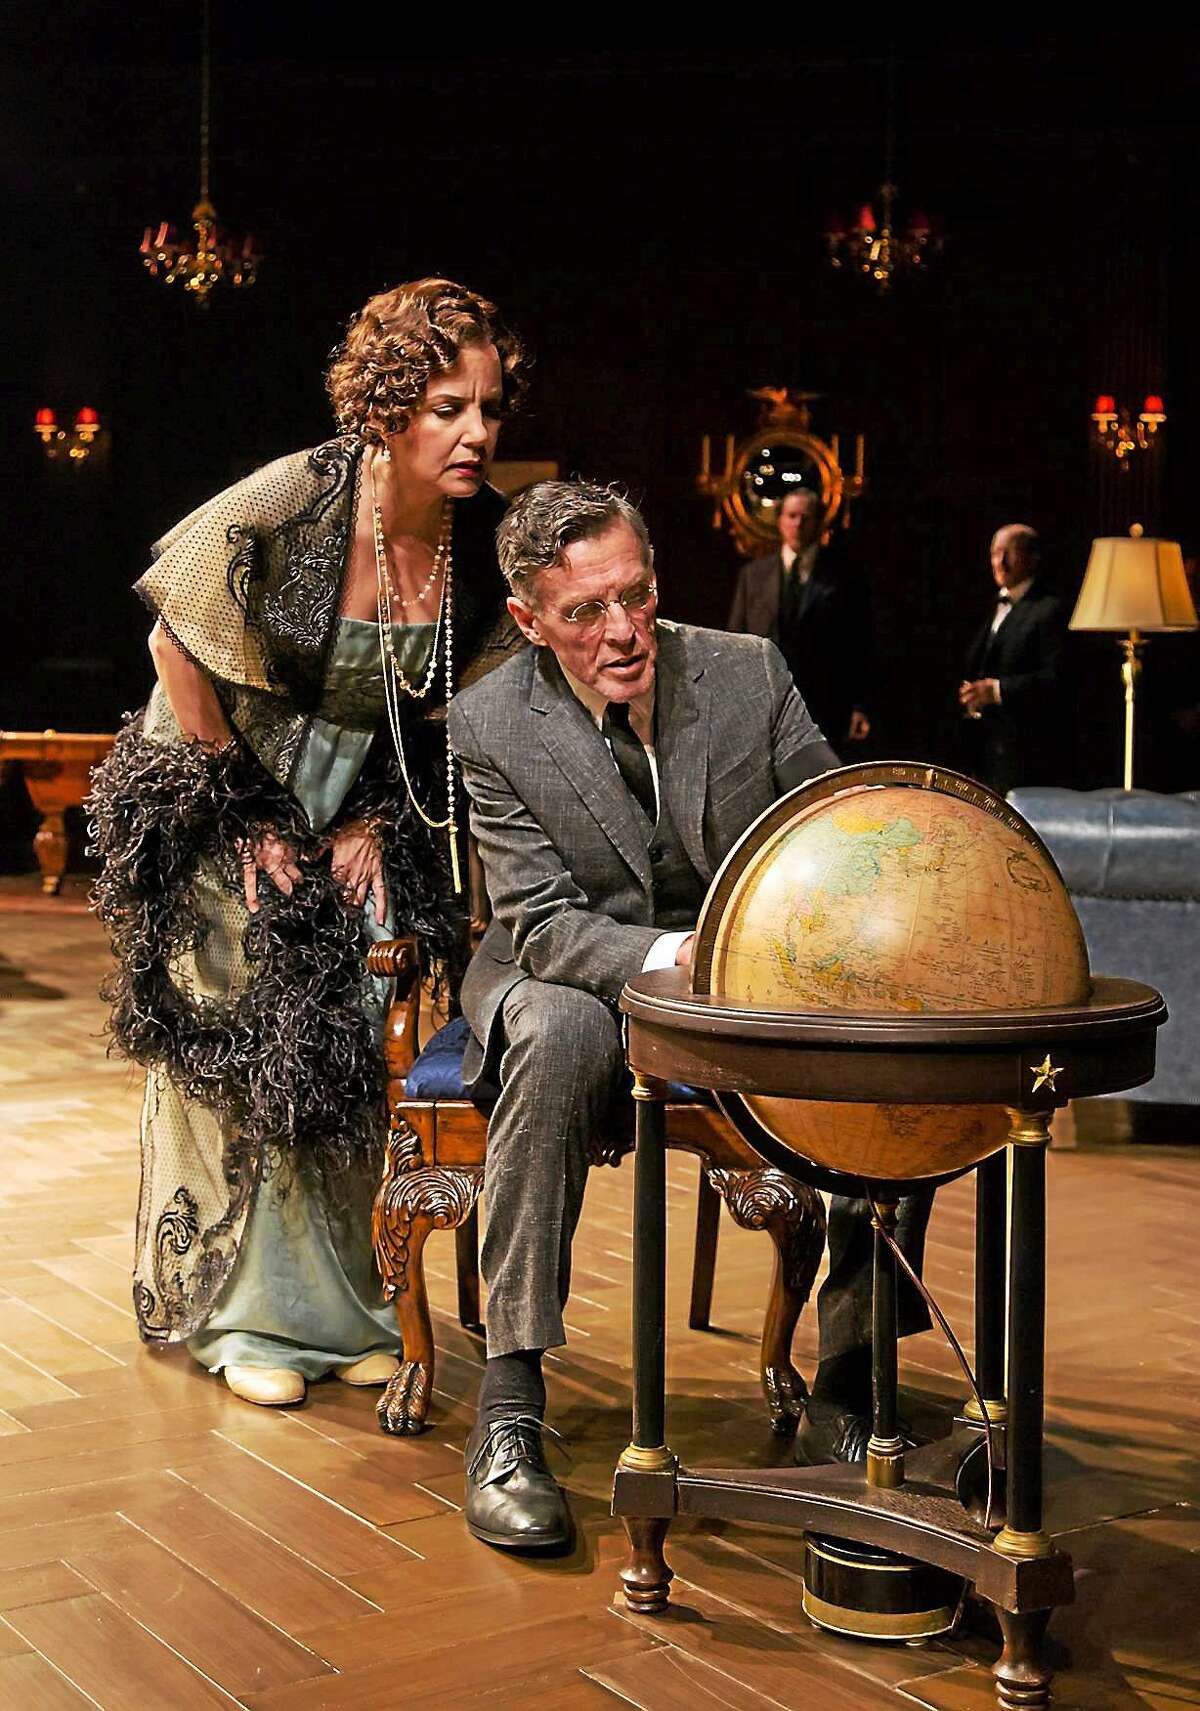 Margaret Colin stars as the first lady and John Glover plays the commander in chief in “The Second Mrs. Wilson” at Long Wharf Theatre.